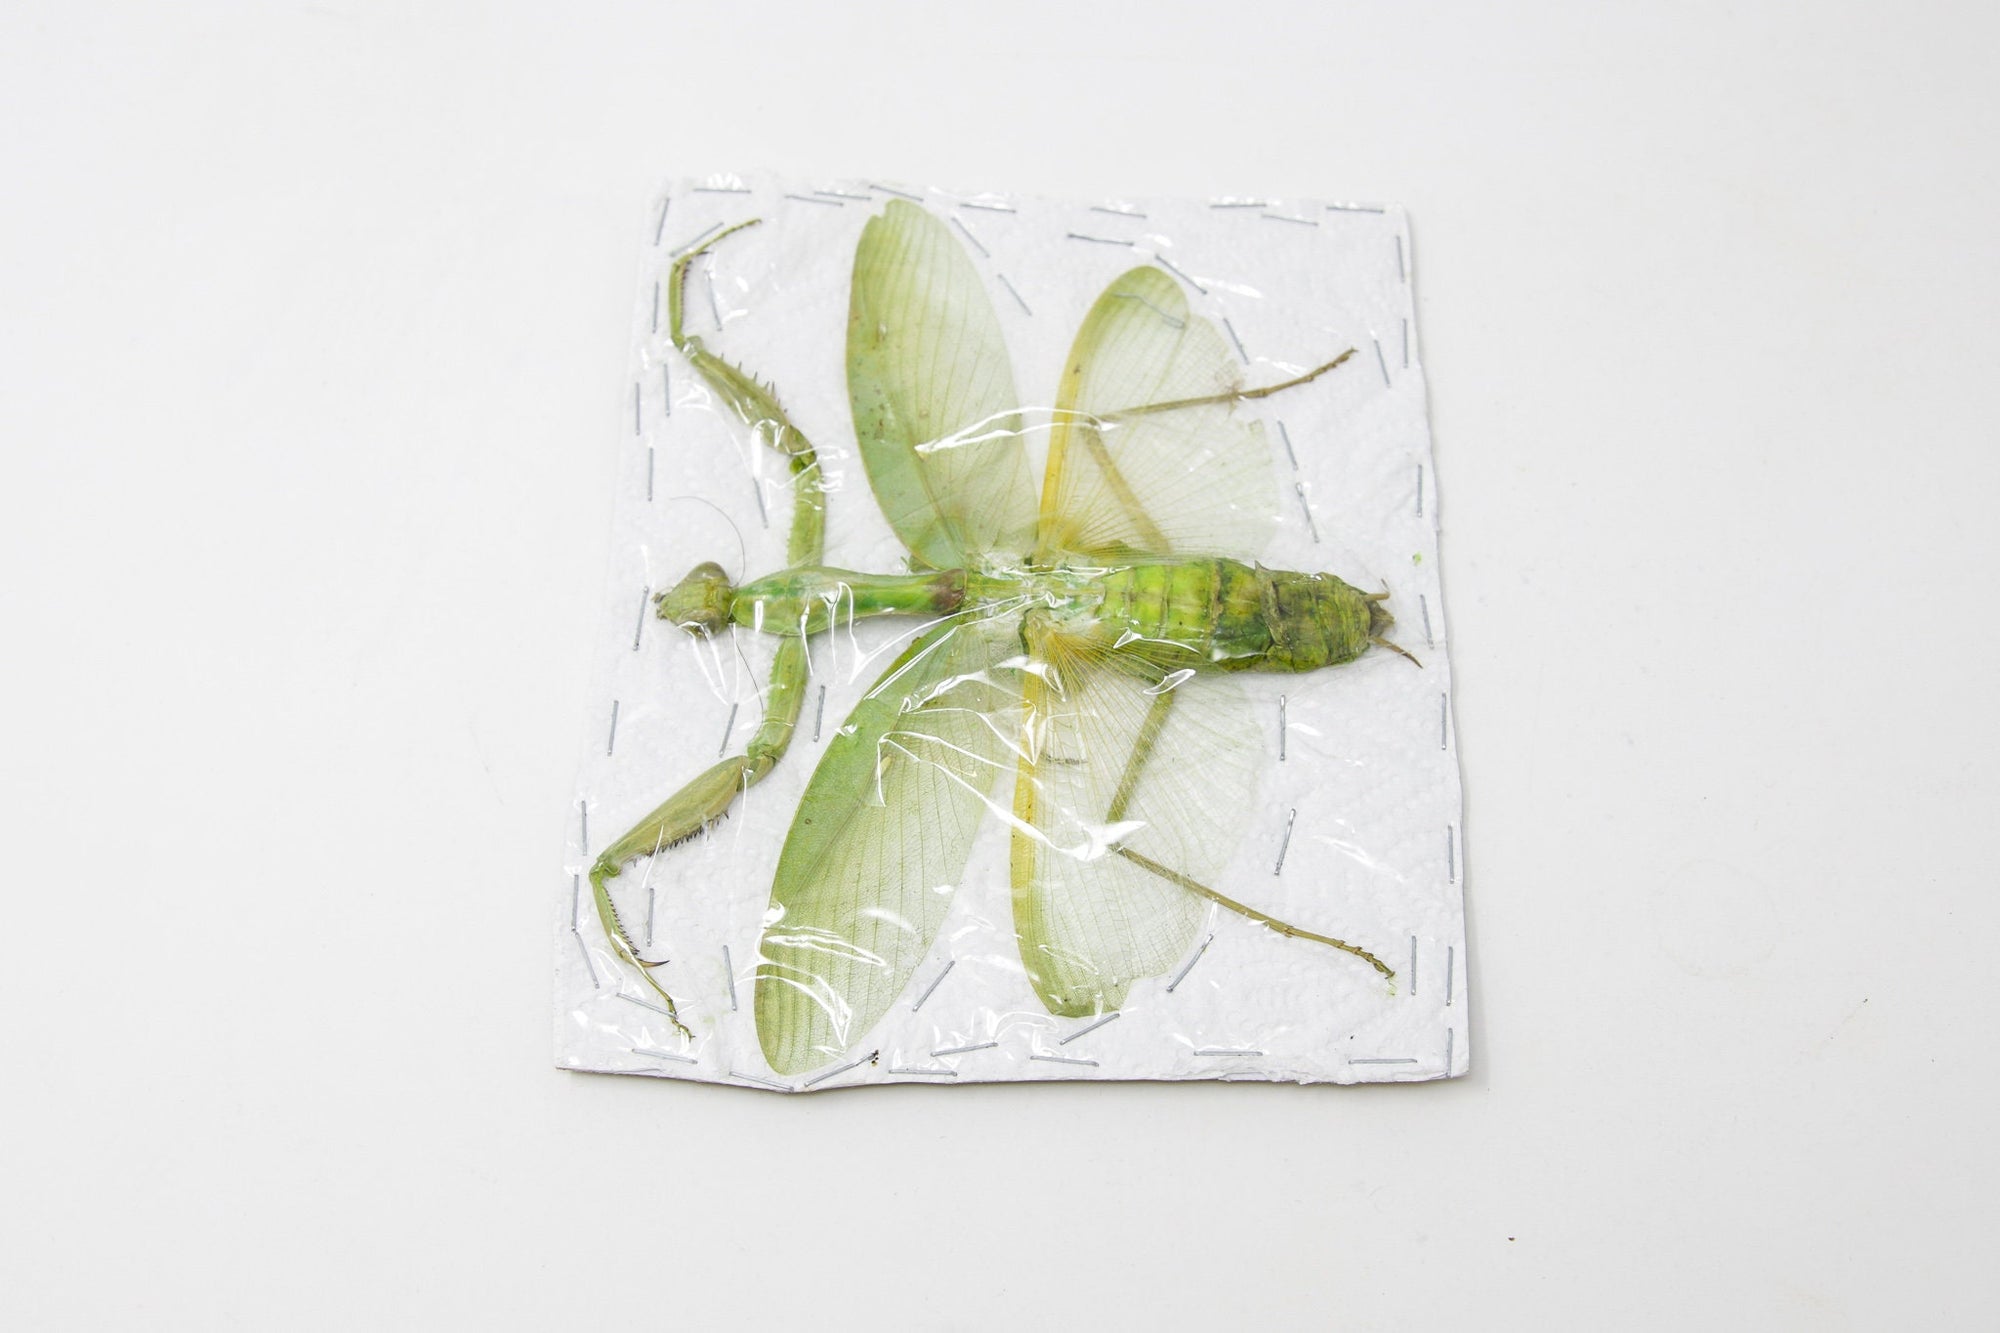 Insect Specimen from Thailand 2021 Green Mantis (A-/A2 Imperfect Specimen)